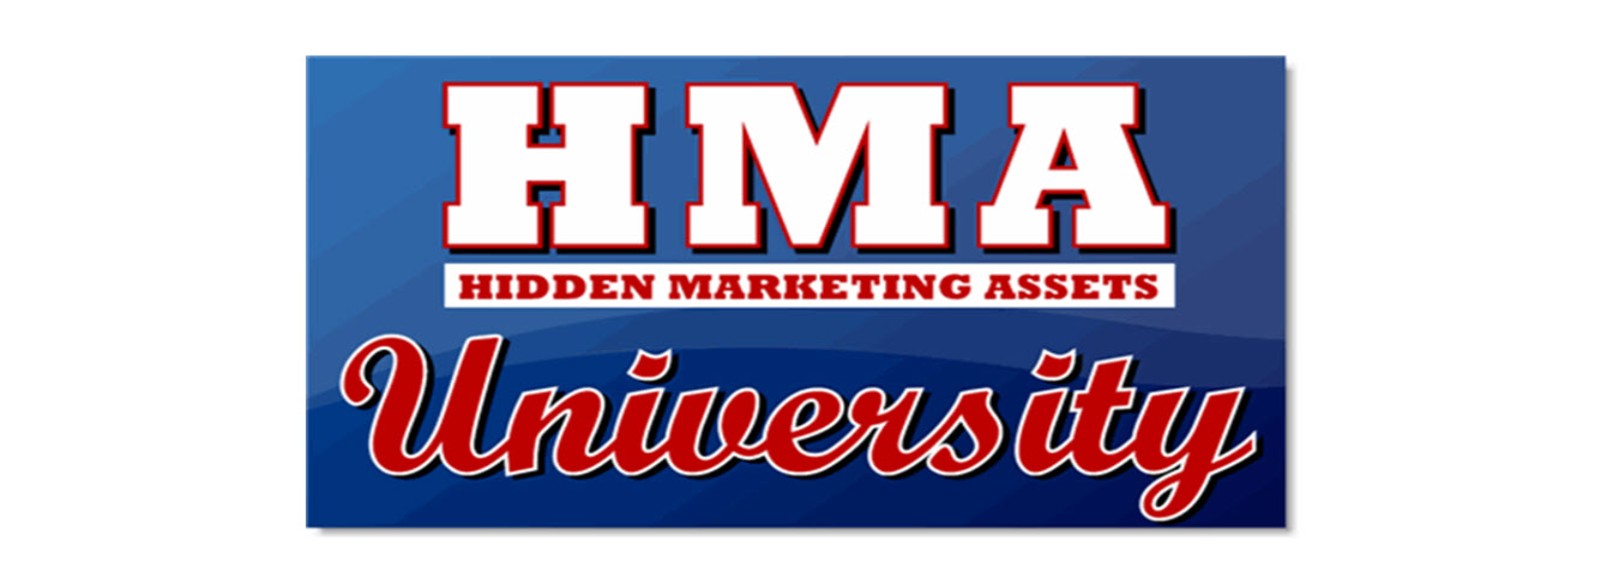 What Is Hidden Marketing Assets Pro System